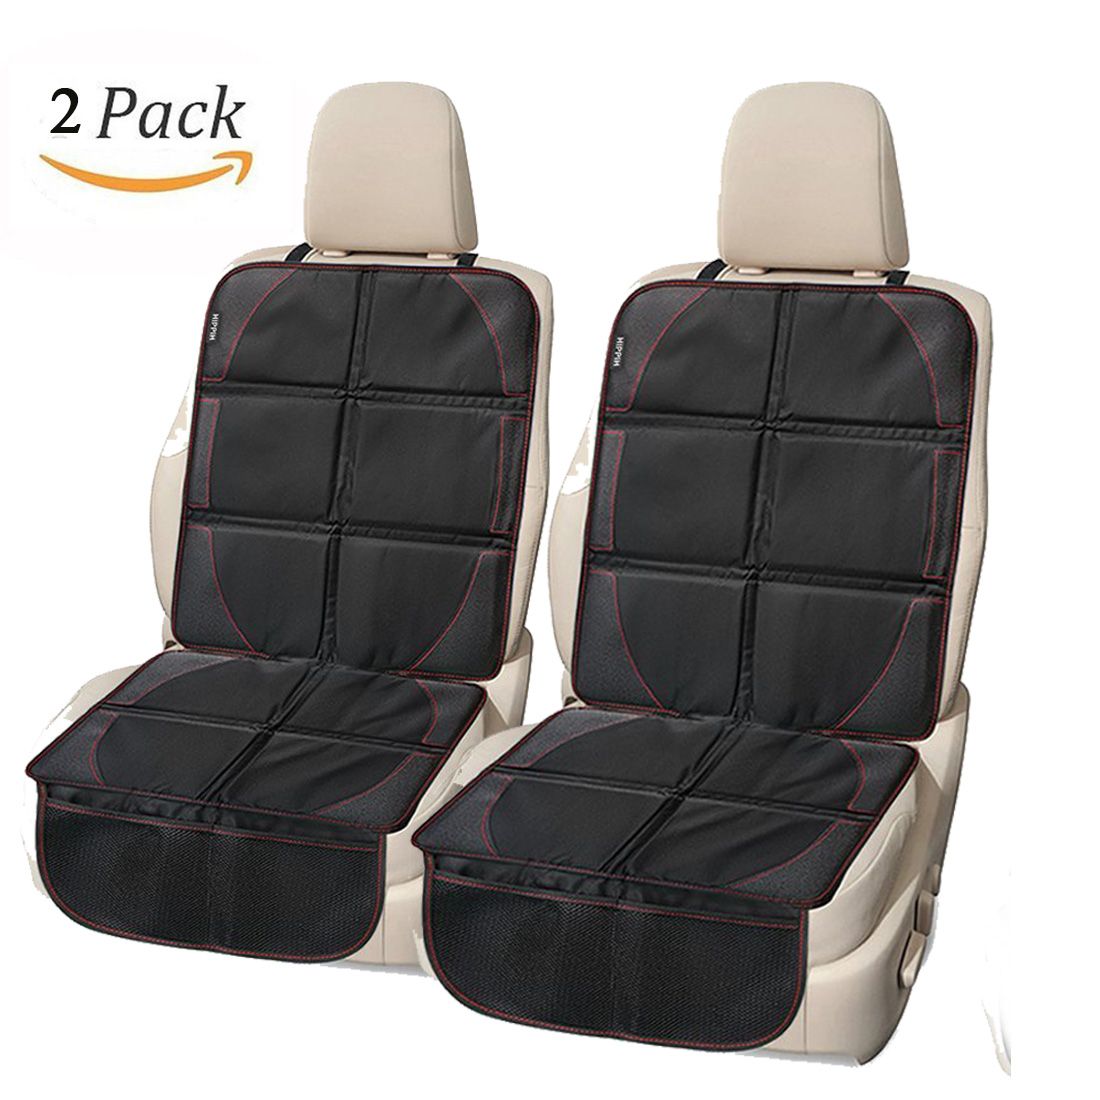 car seat protector covers